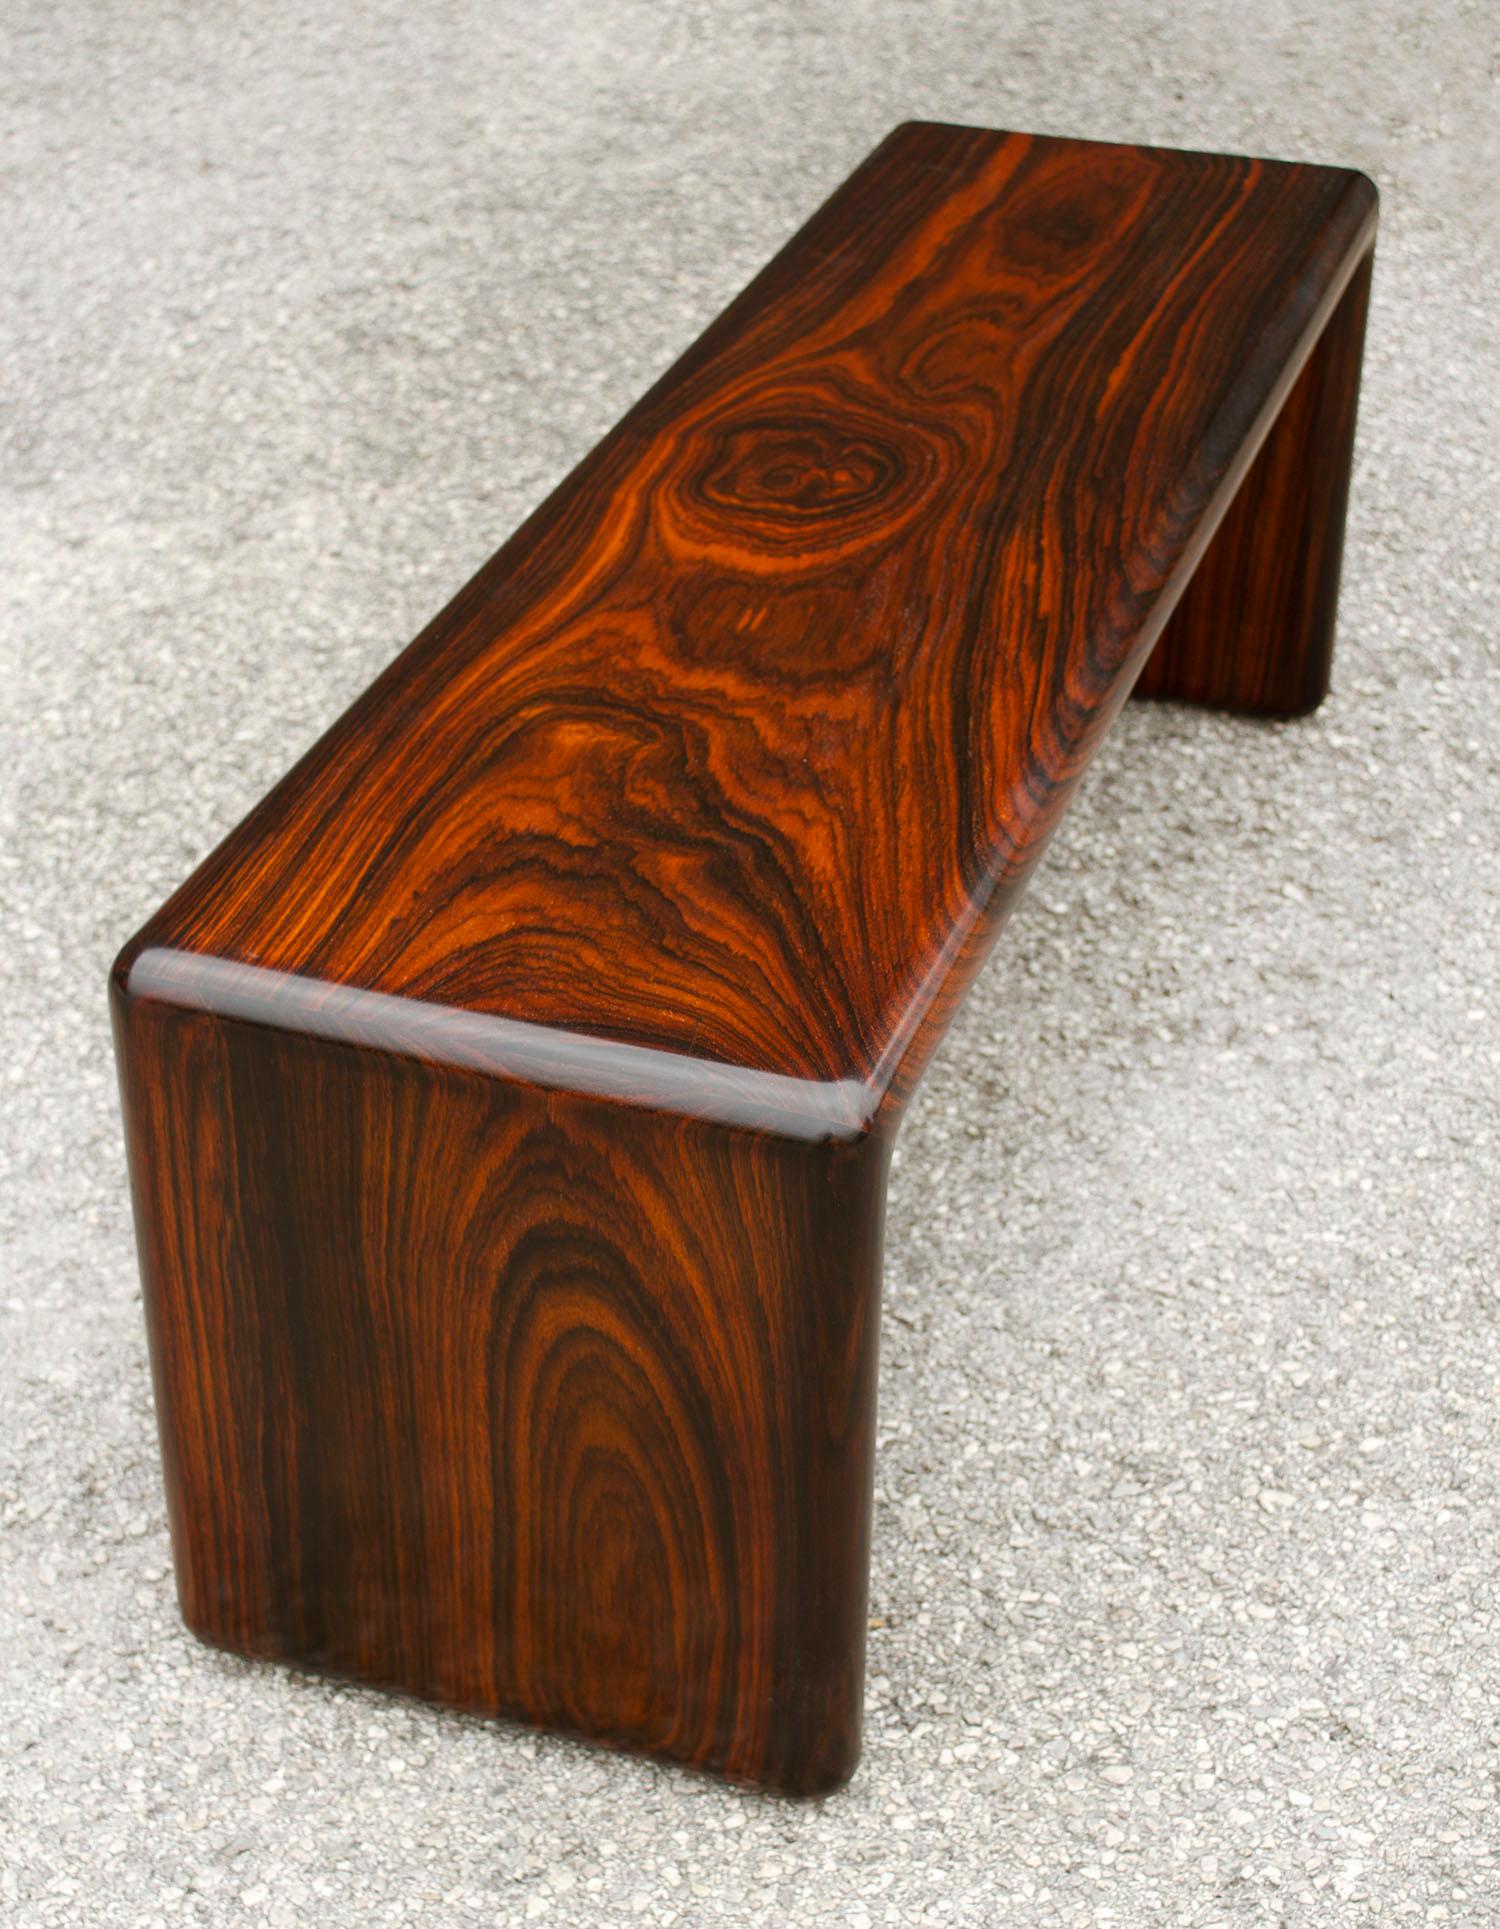 Don Shoemaker Solid Brazilian Rosewood Table / Bench 1970s Studio Craft Mexico 1